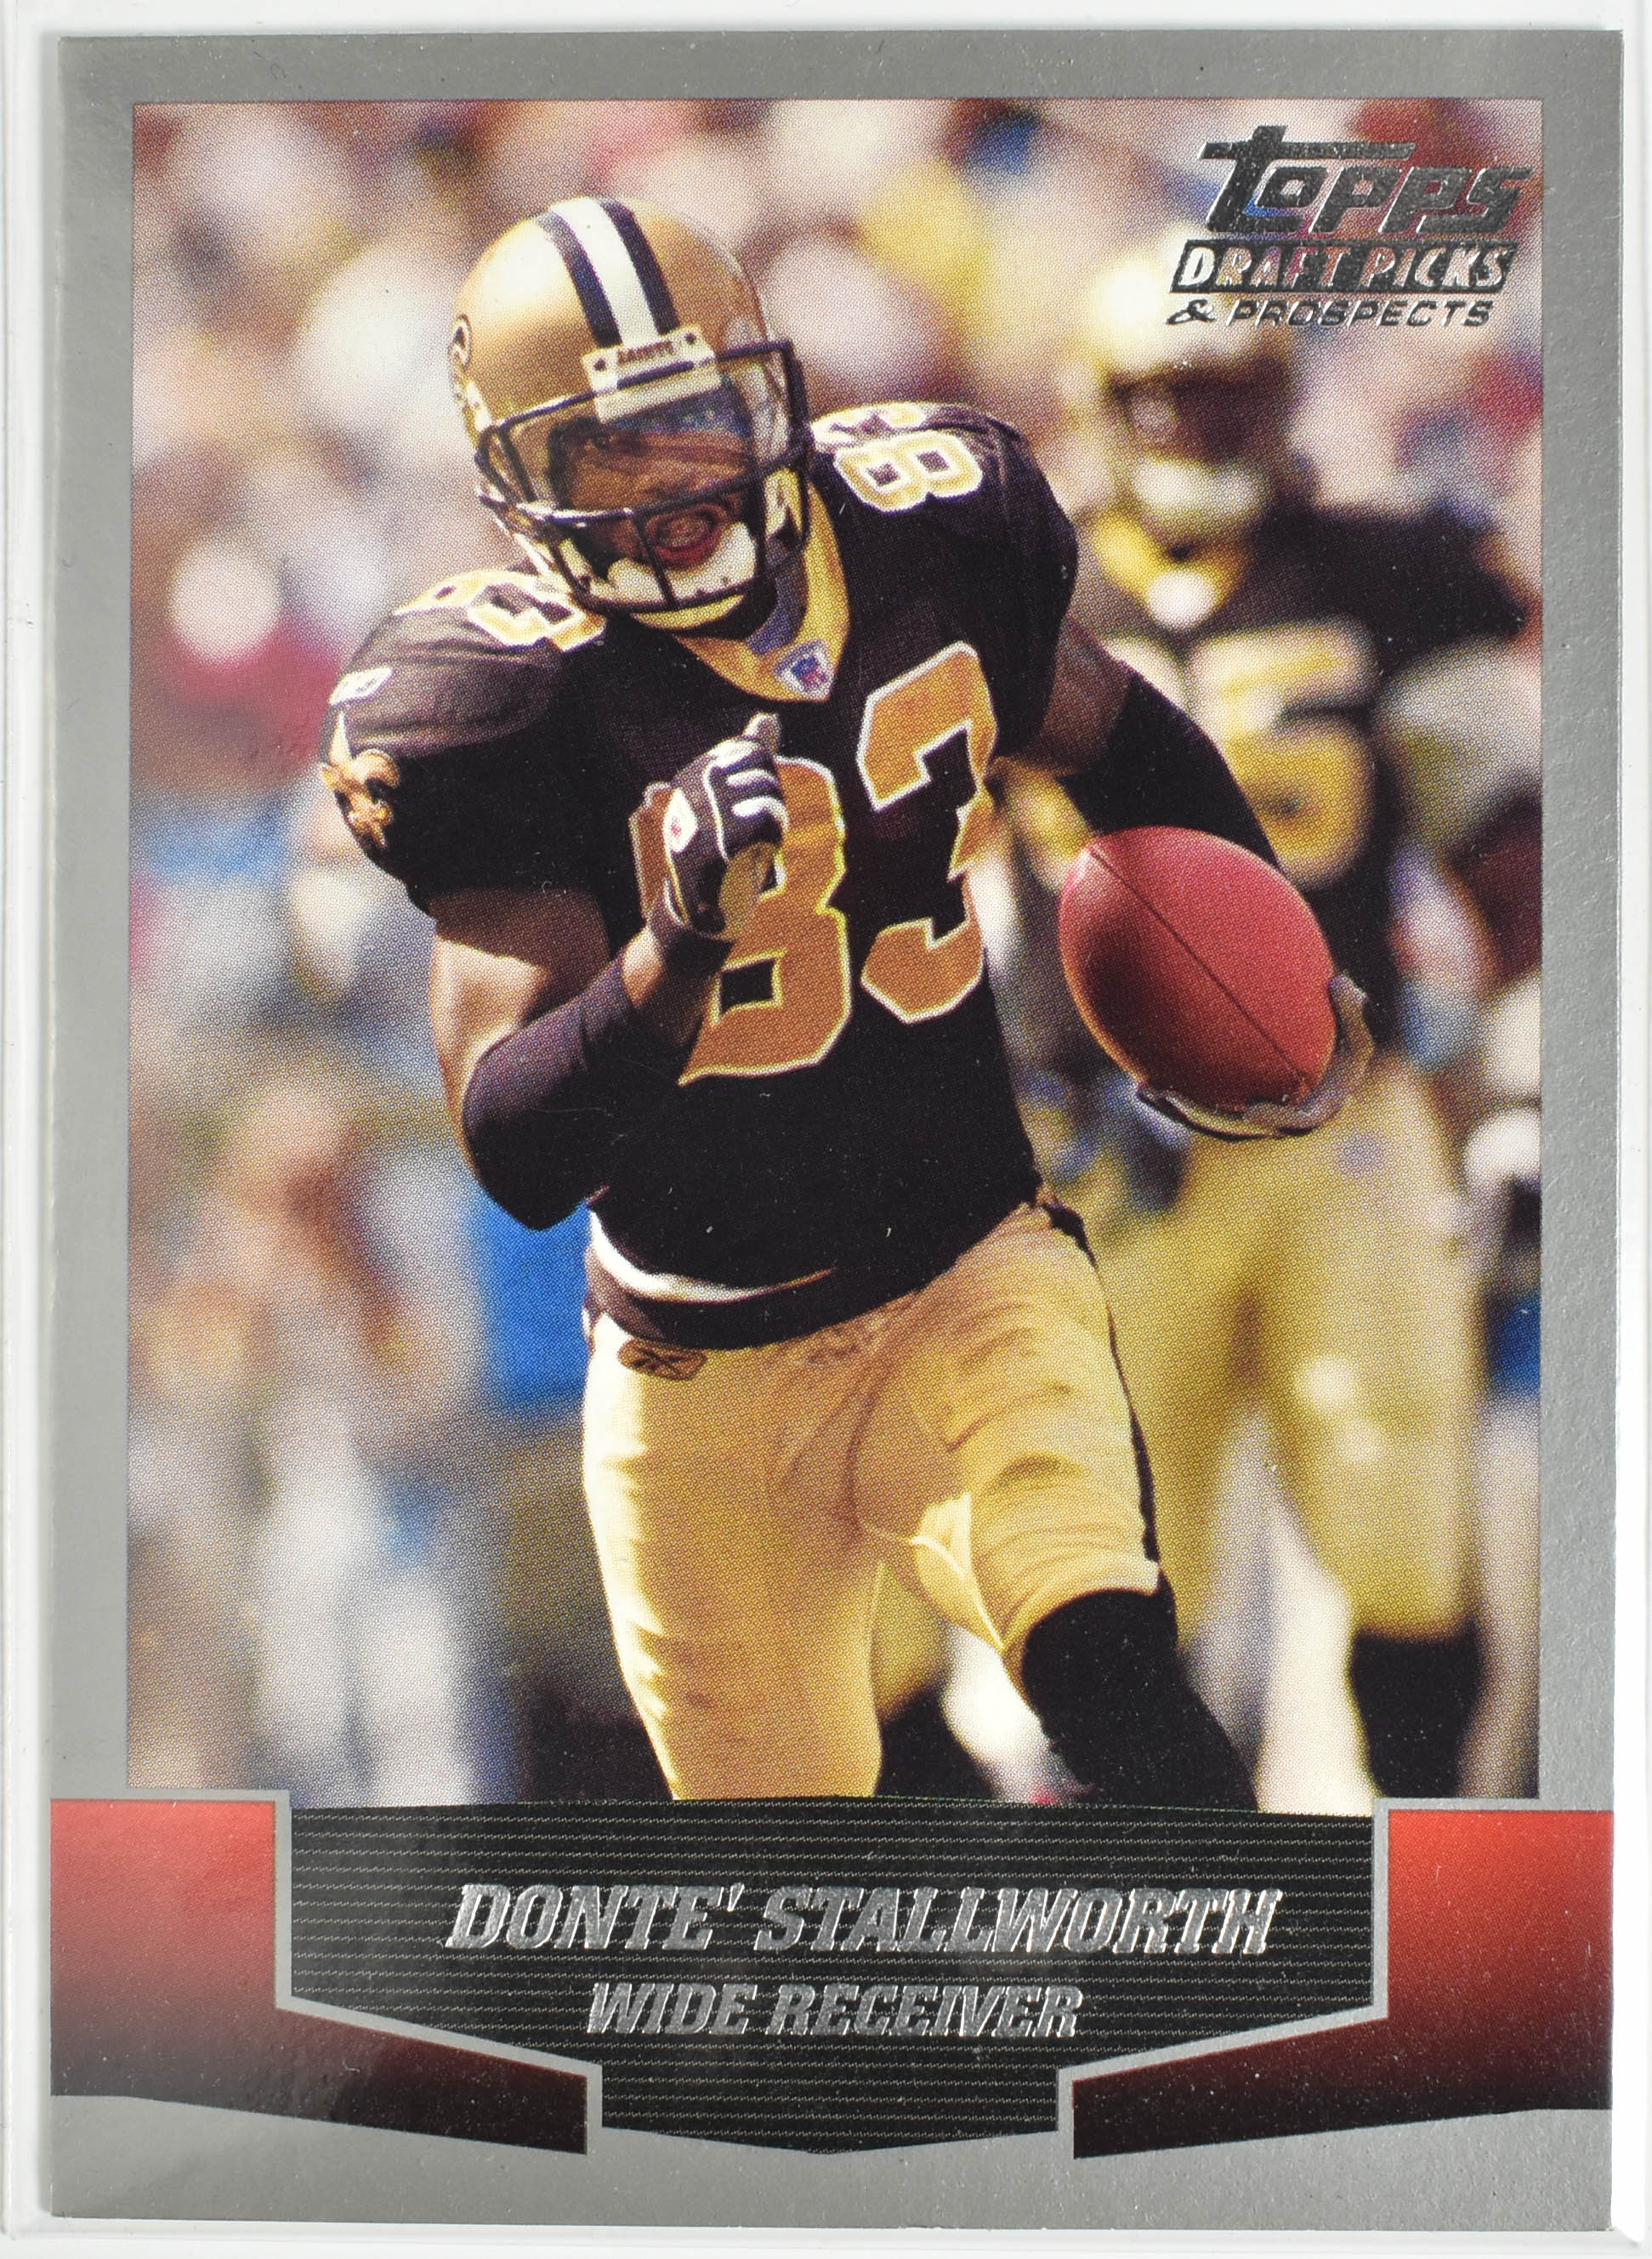 2004 Topps Draft Picks and Prospects Football Card #91 Donte' Stallworth